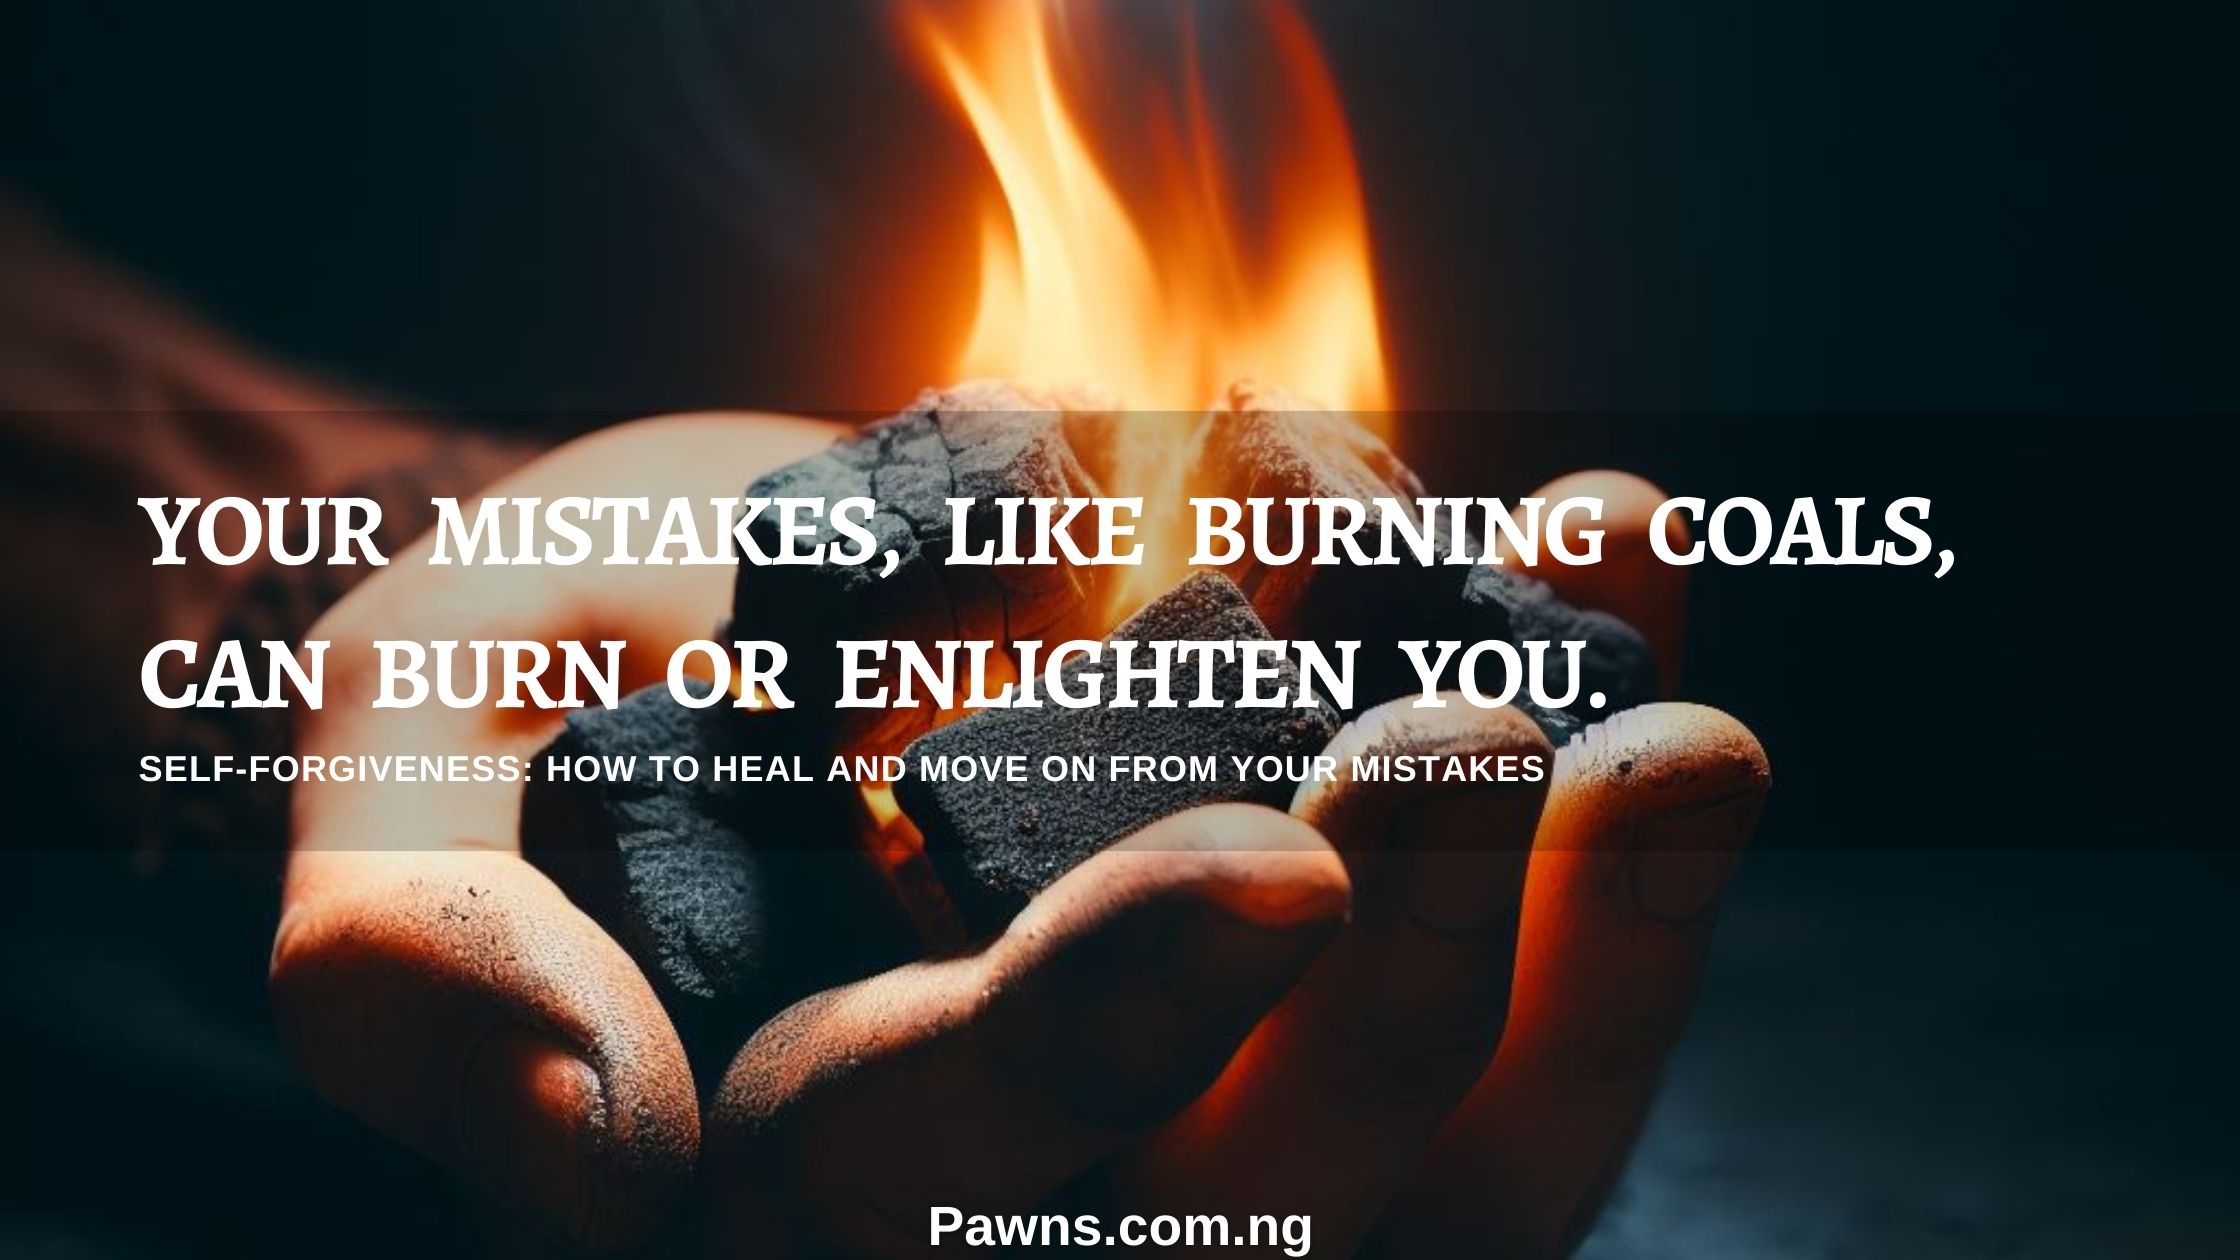 Your mistakes, like burning coals, can burn or enlighten you. Self-Forgiveness How to Heal and Move On From Your Mistakes